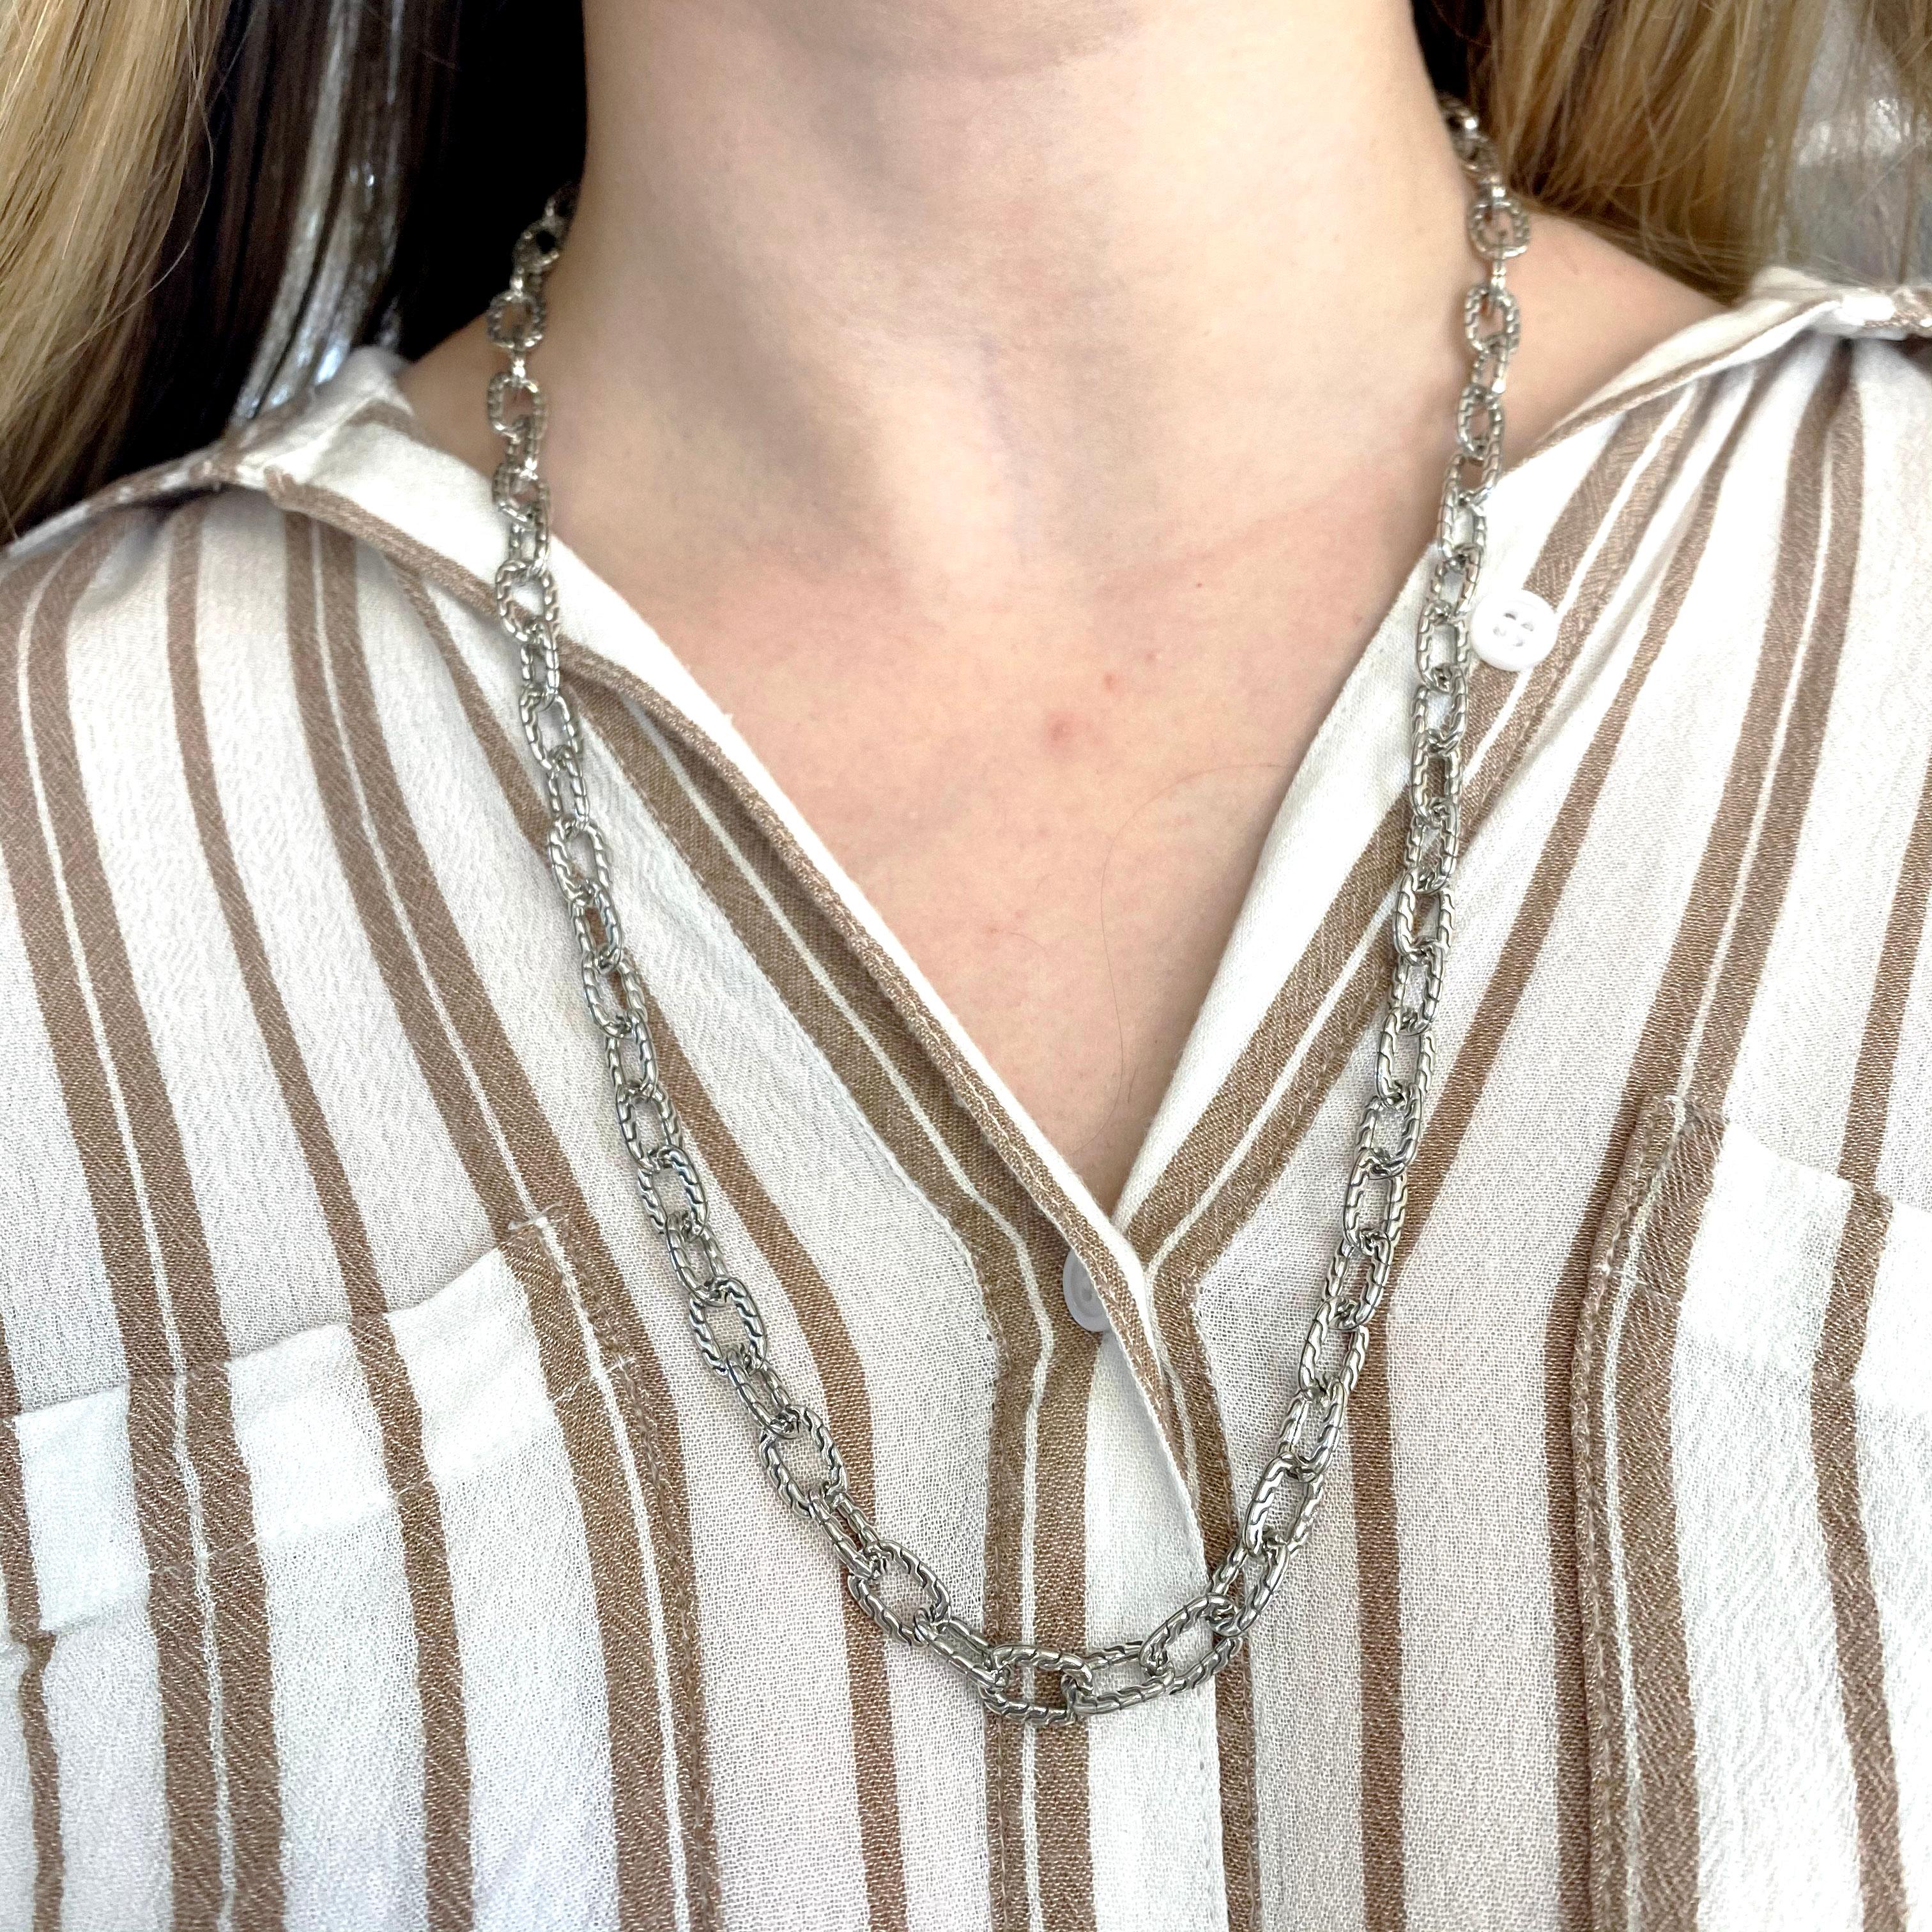 This heavy designer chain in made in solid sterling silver and weighs almost 2 ounces and is 24 inches long.  This length is perfect for putting over your head and not worrying about the clasp. The links are 8.25 millimeter in diameter and make a